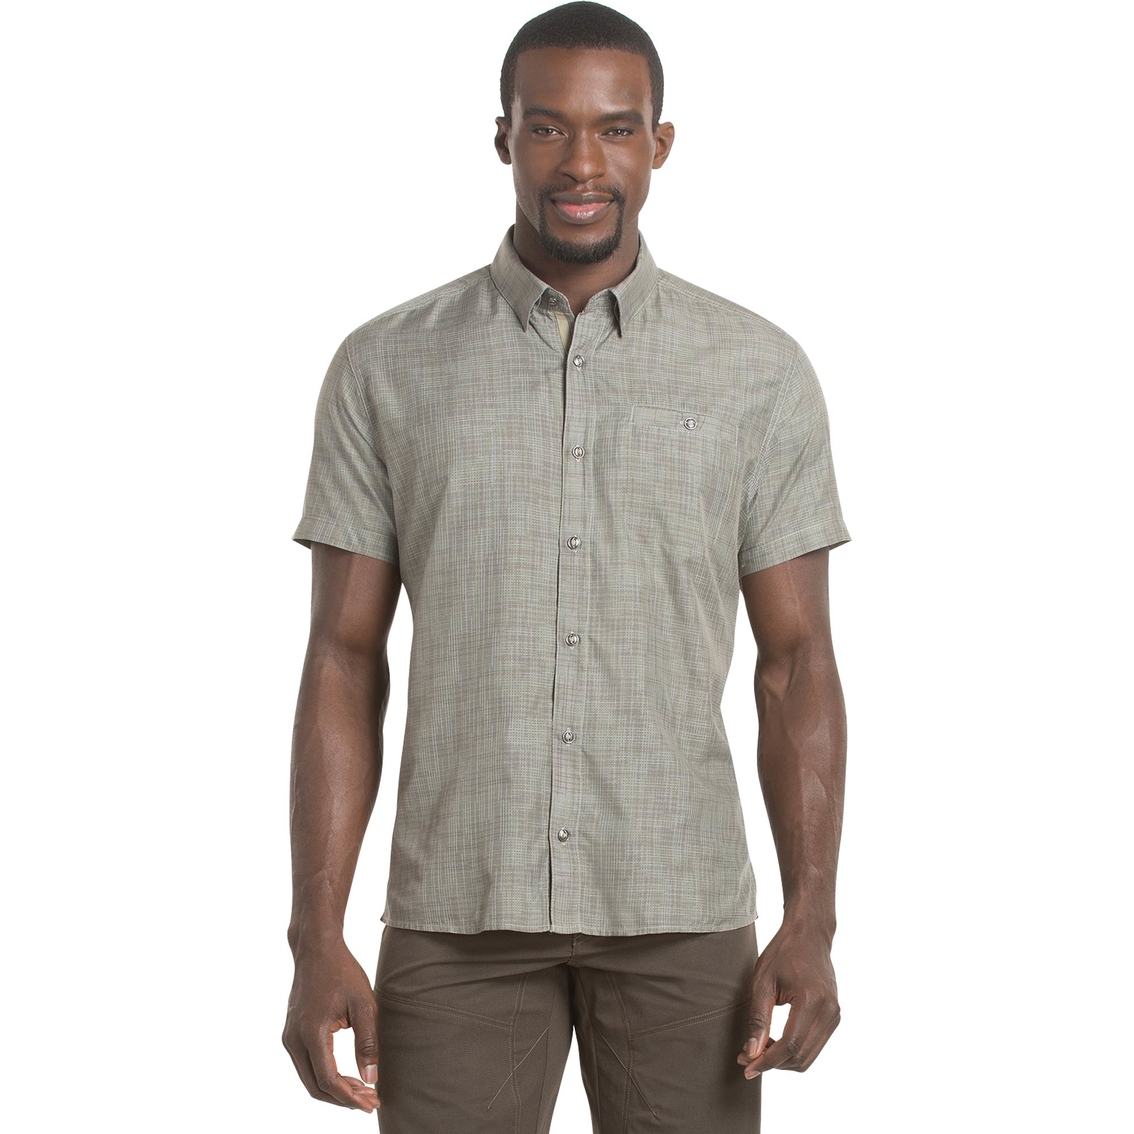 Kuhl Krossfire Woven Top | Shirts | Clothing & Accessories | Shop The ...